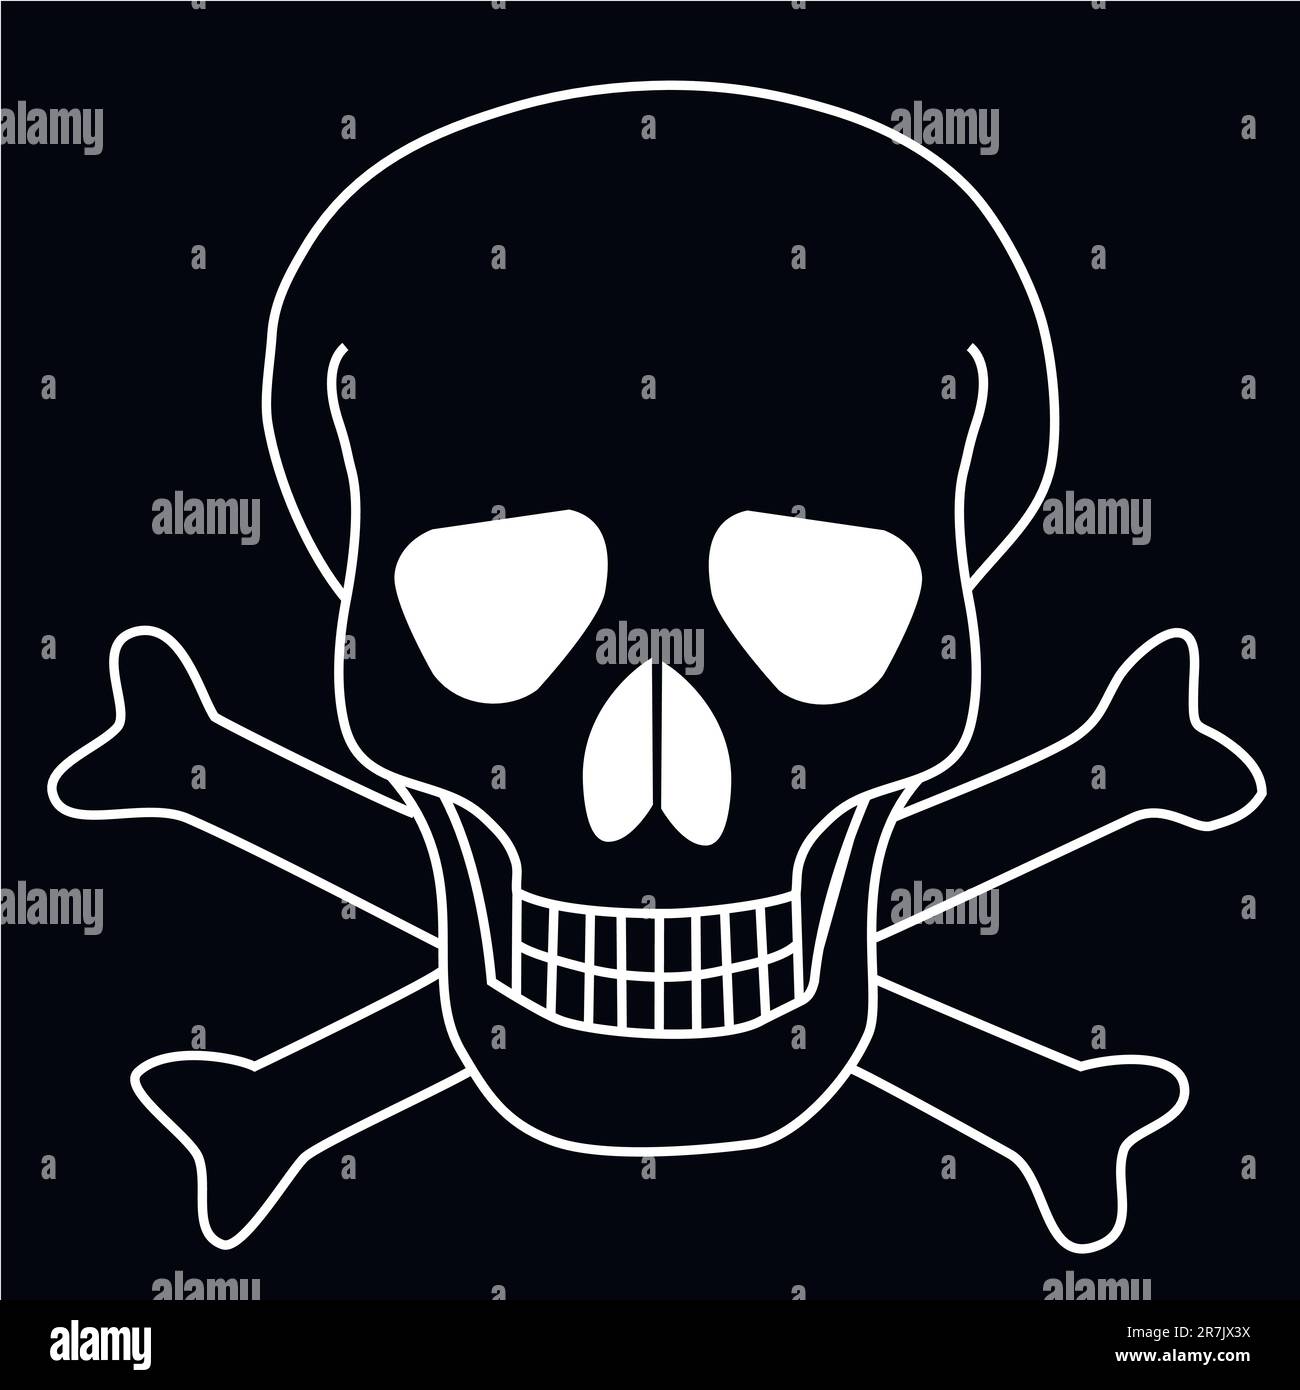 Vector image of a skull and crossbones on a black background Stock Vector